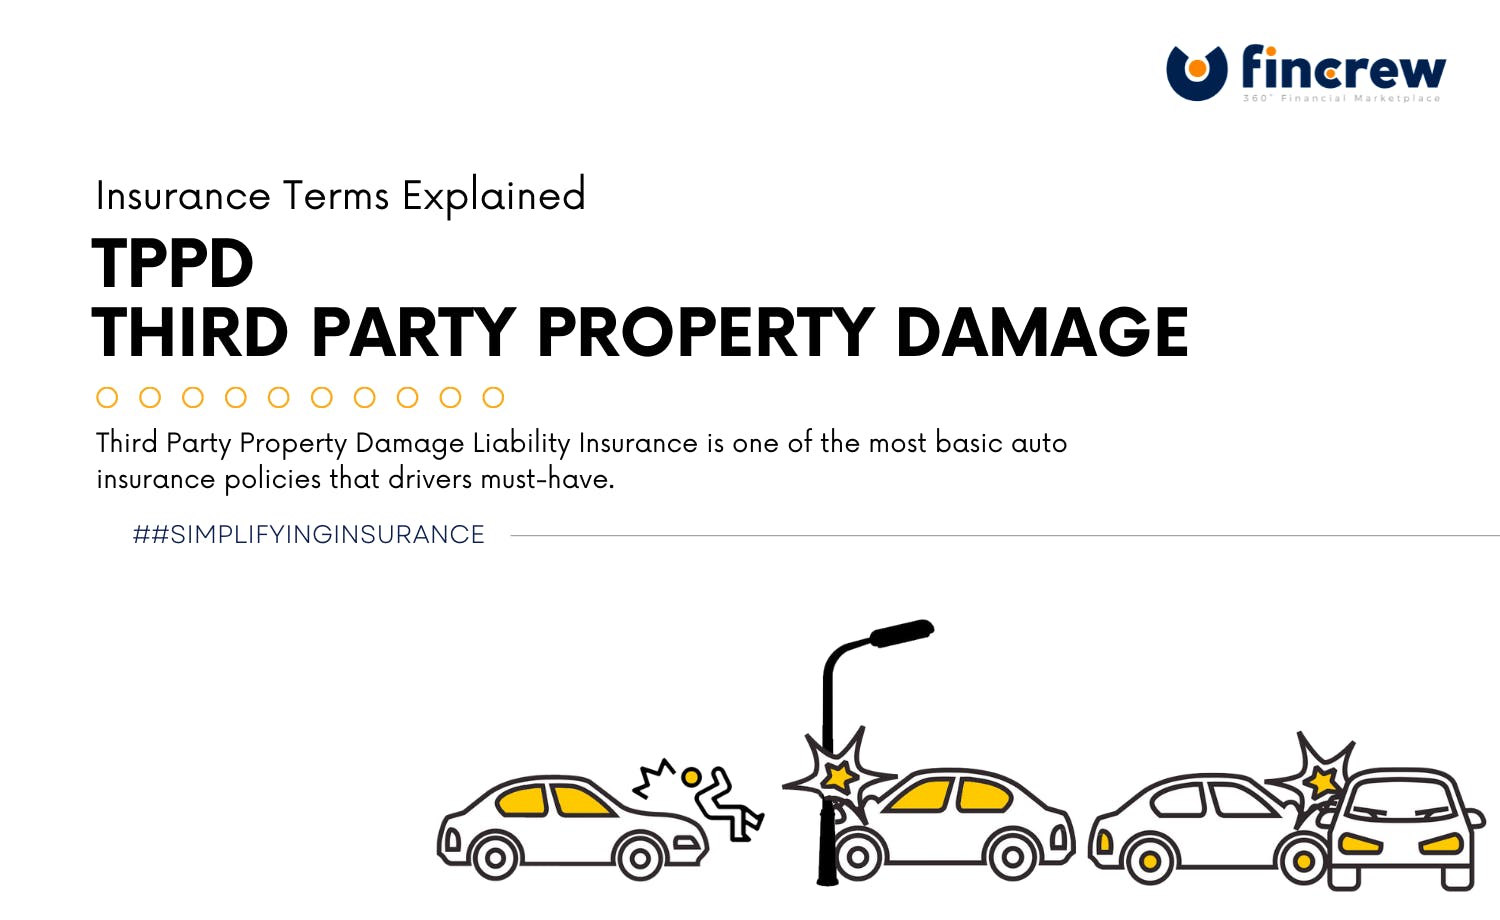 Third Party Property Damage In Insurance Terms Explained